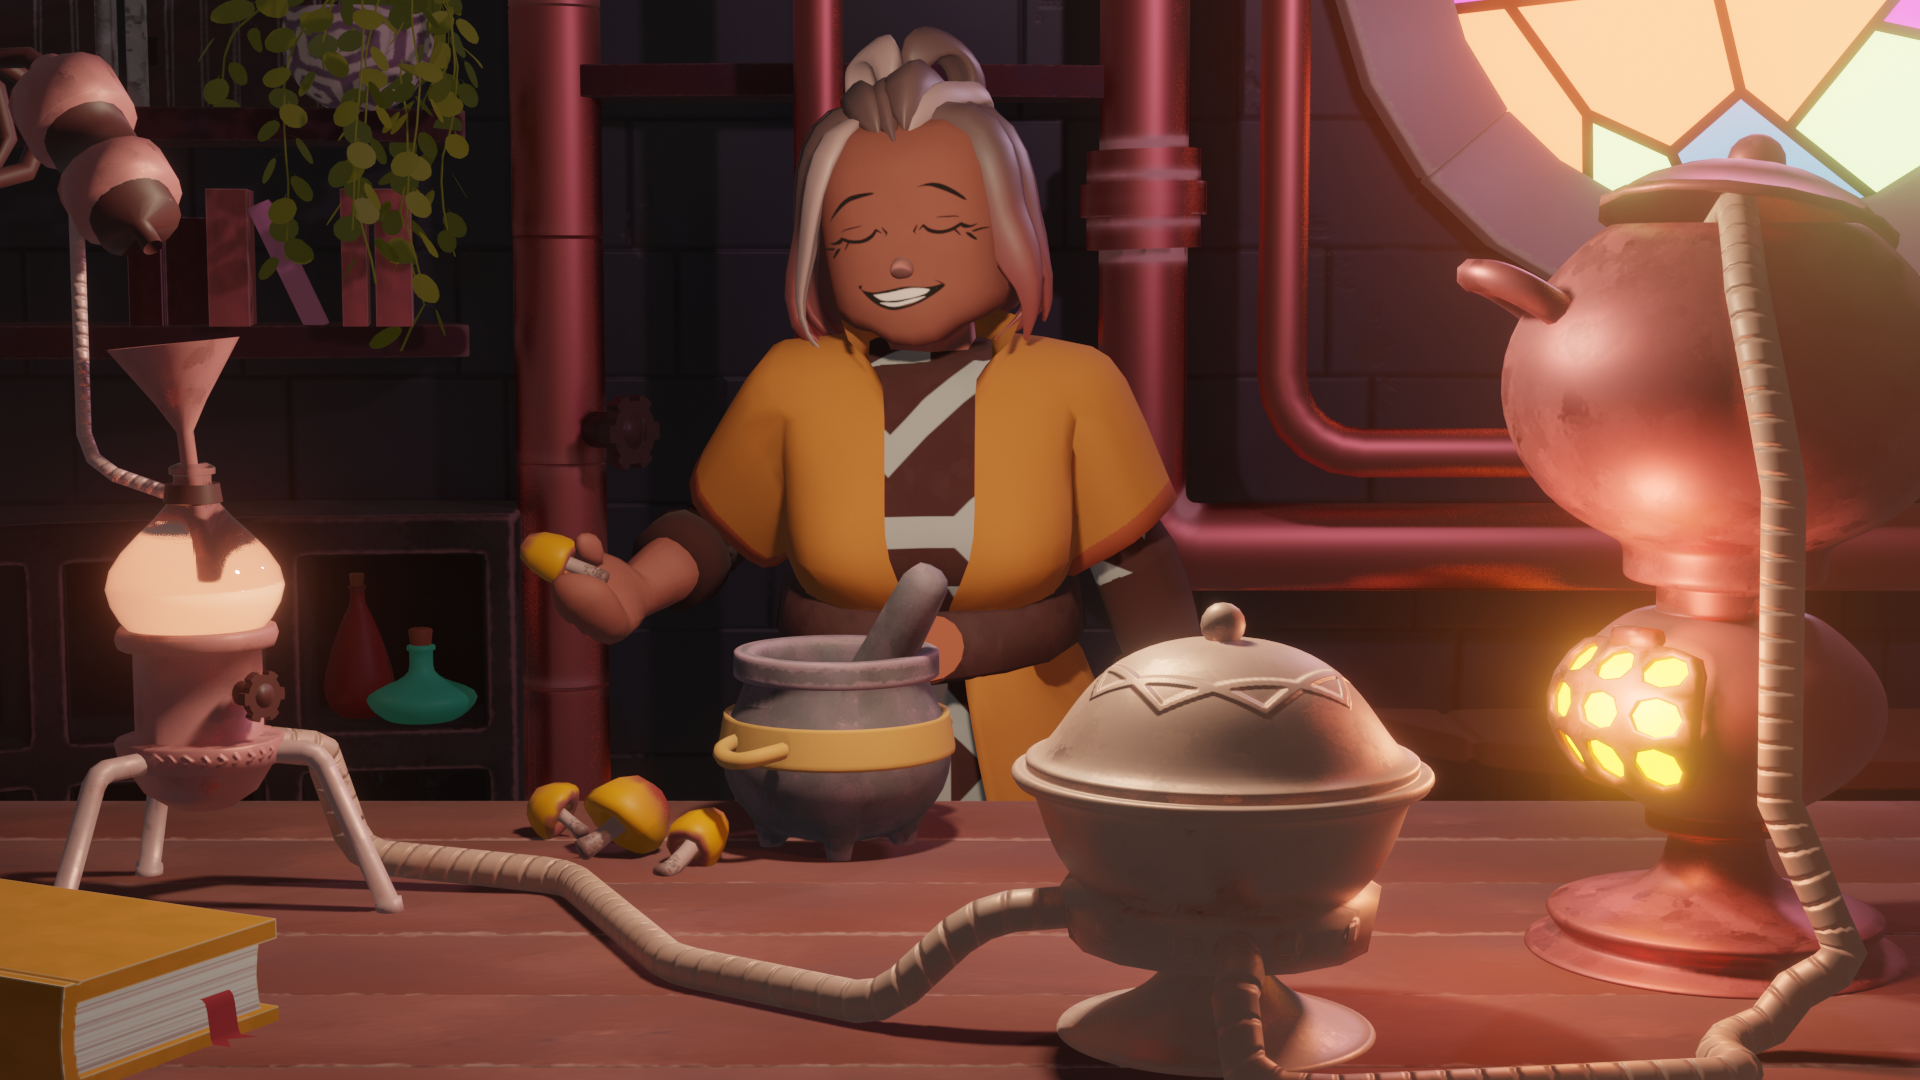 Featris smiles while making potions at a table full of ingredients and equipment.